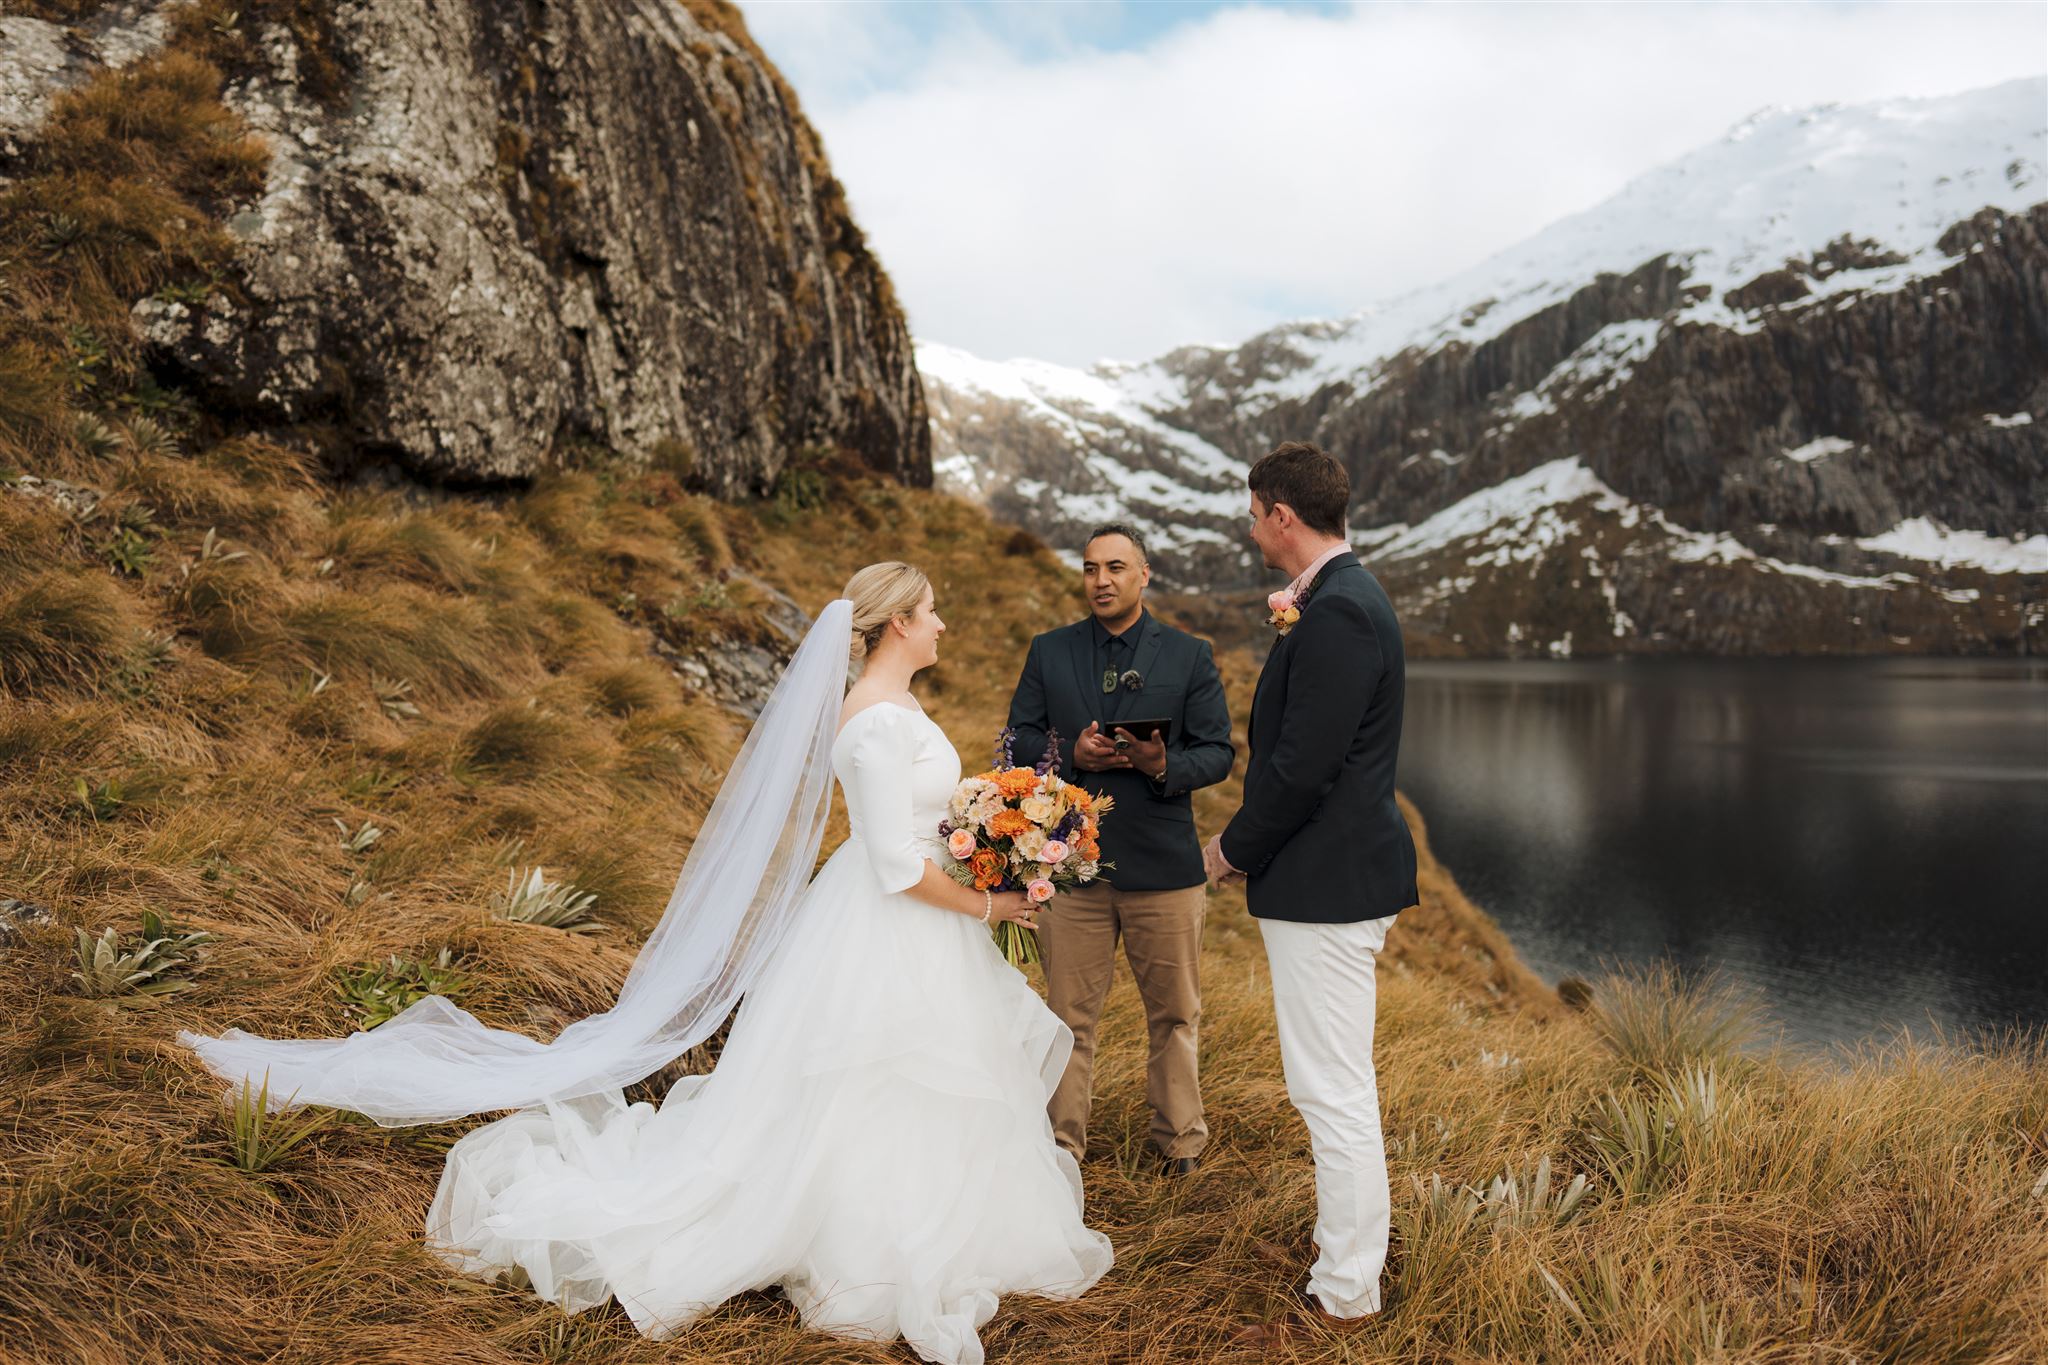 Wedding ceremony with marriage celebrant at Moke Lake in Queenstown, New Zealand